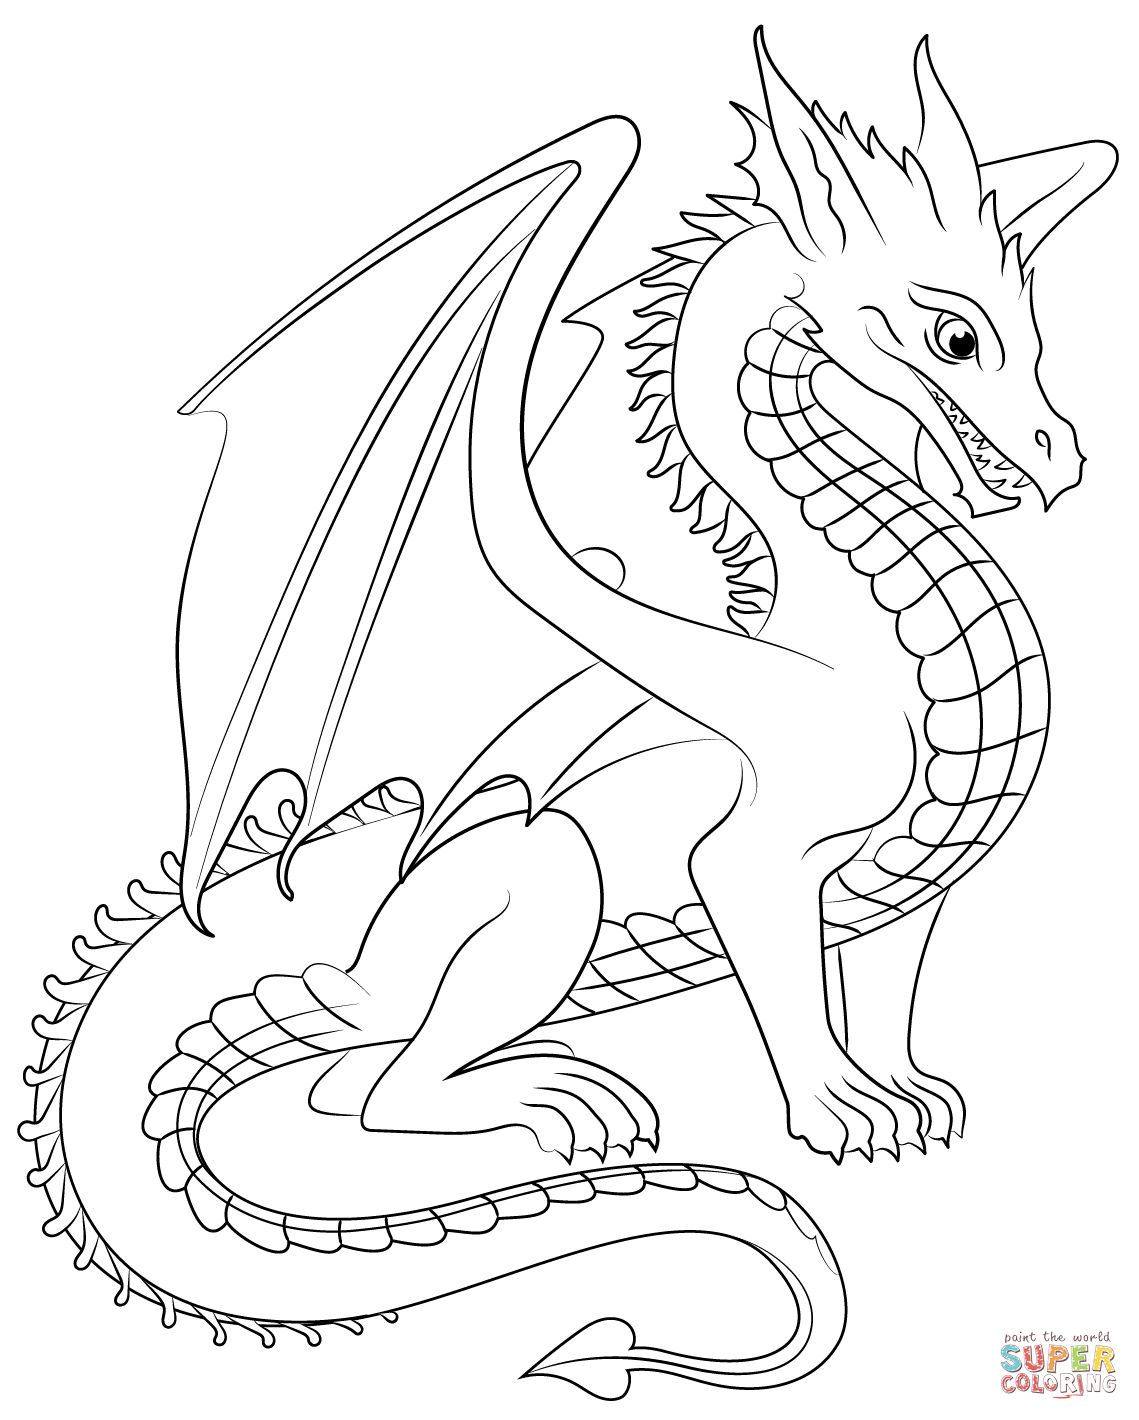 Dragon coloring page free printable coloring pages